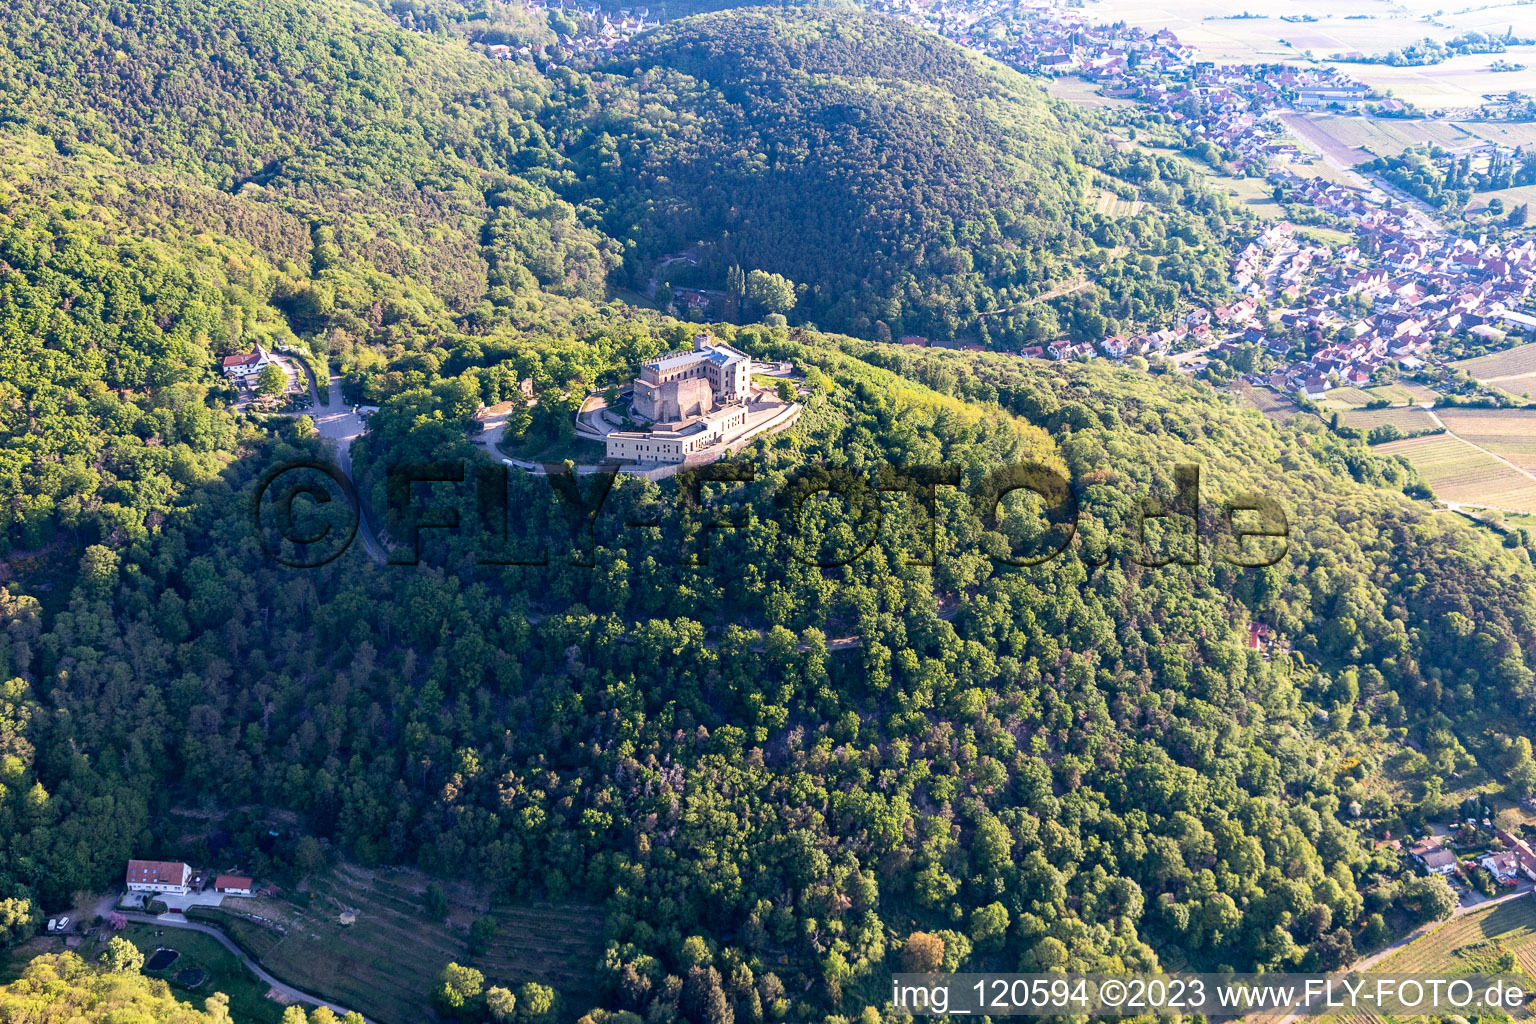 Hambach Castle in the district Diedesfeld in Neustadt an der Weinstraße in the state Rhineland-Palatinate, Germany from the plane